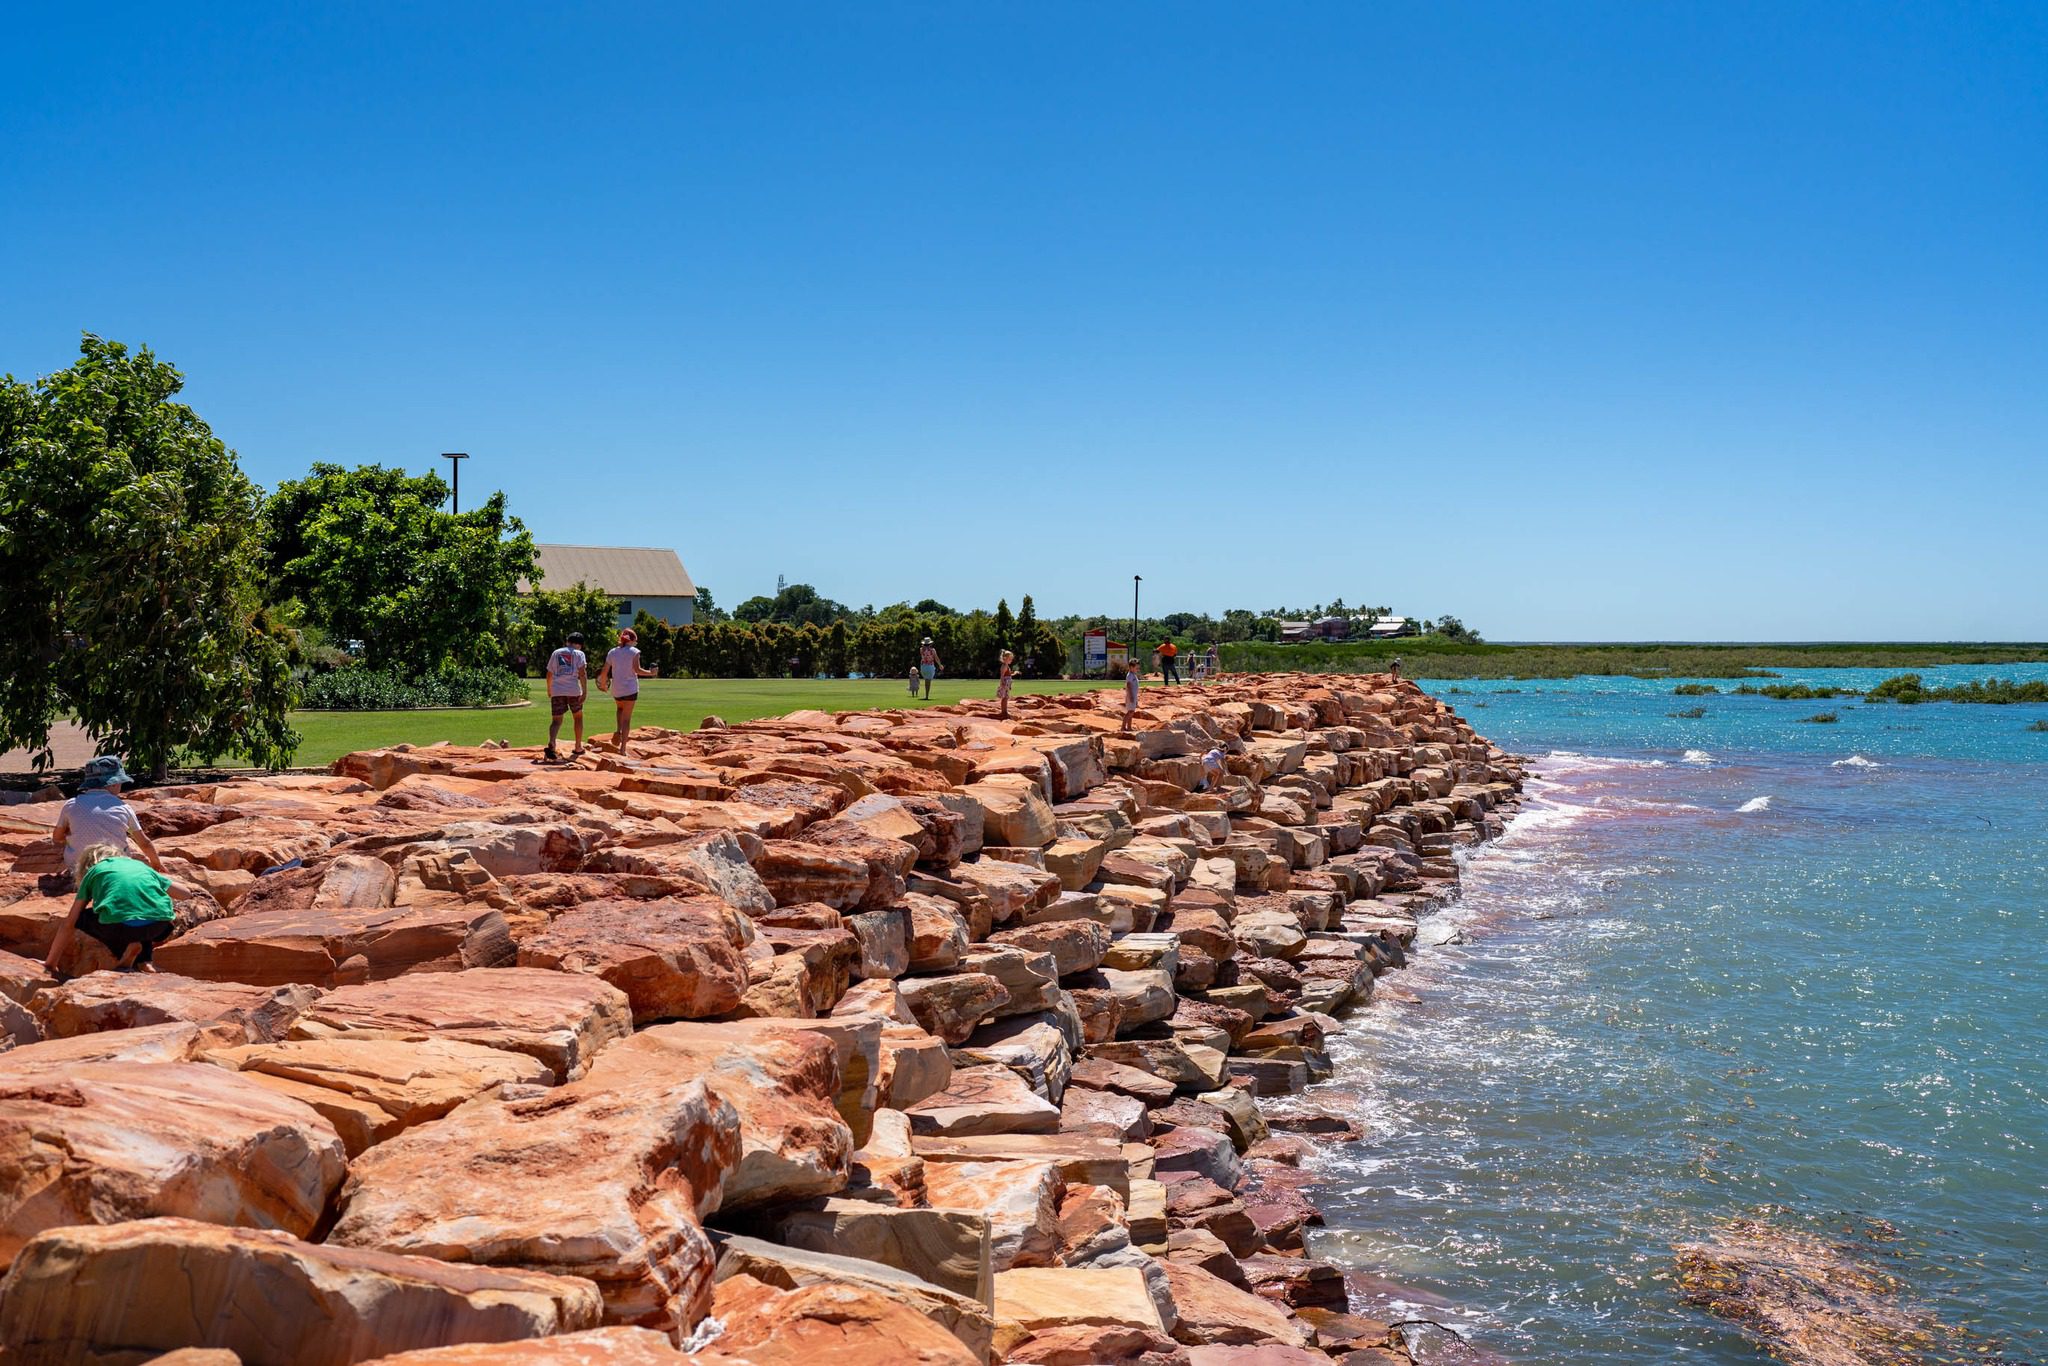 The Town Beach foreshore in Broome, which has a well-maintained green lawn behind a bank of red rocks that hold back the ocean water